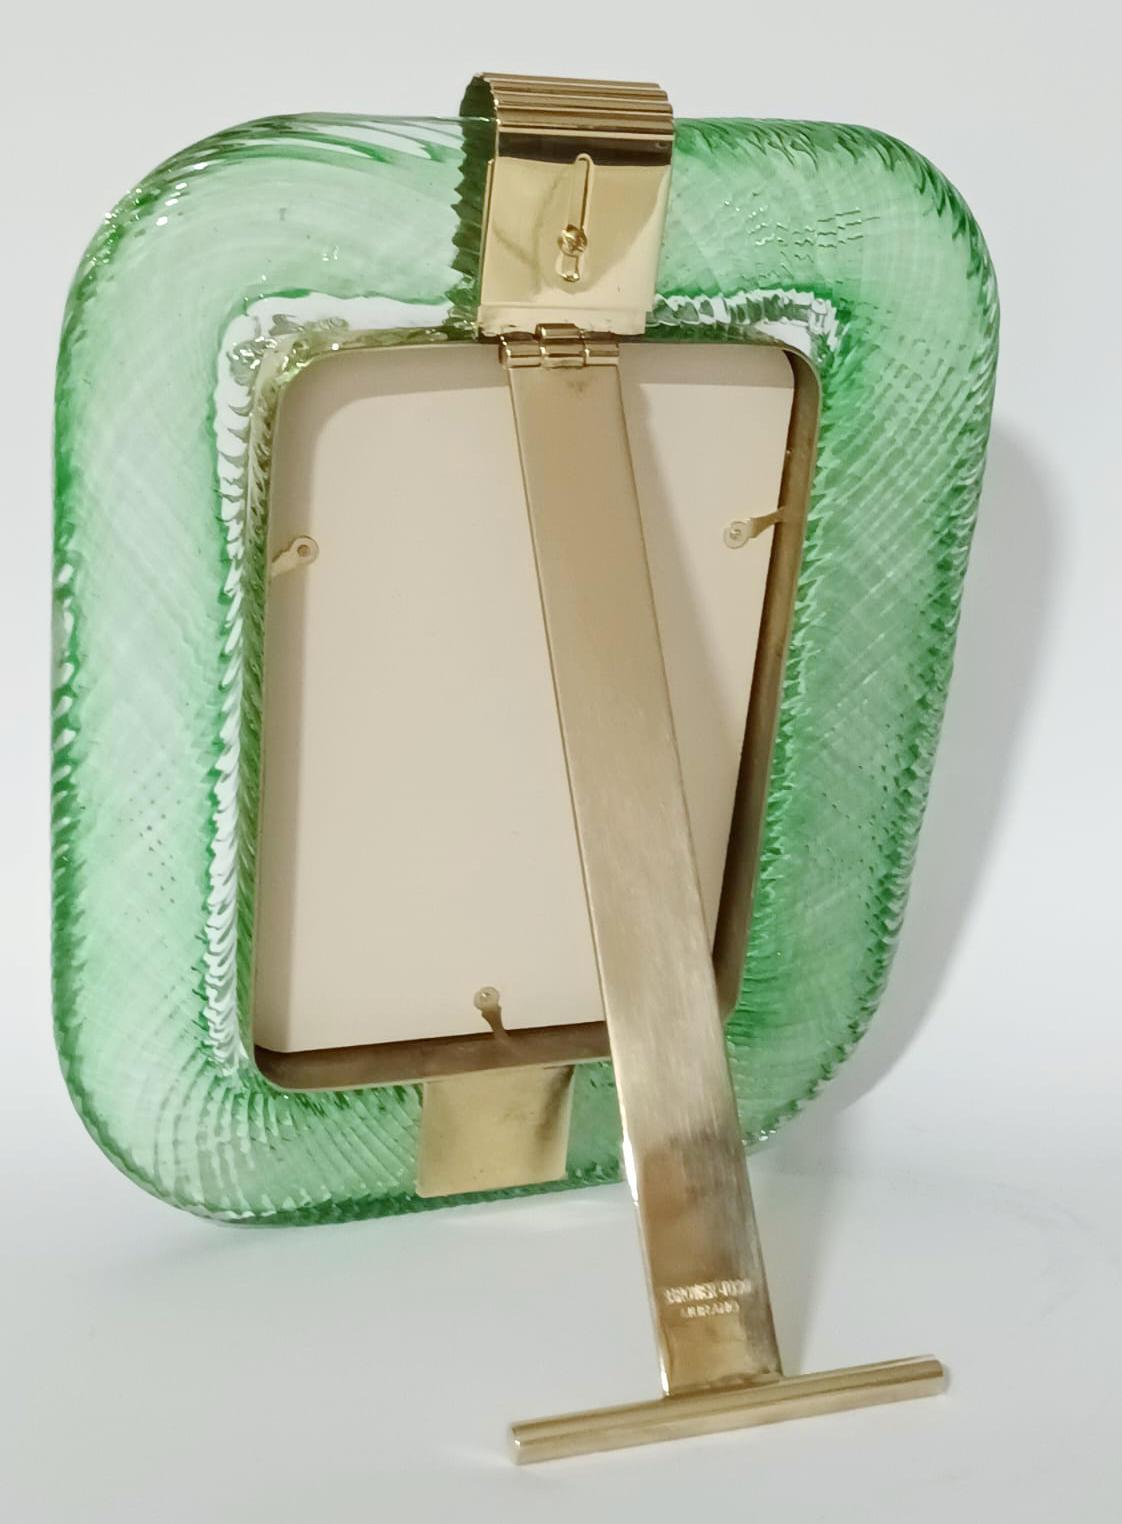 Murano Green Photo Frame by Barovier e Toso - 3 Available In Good Condition For Sale In Los Angeles, CA